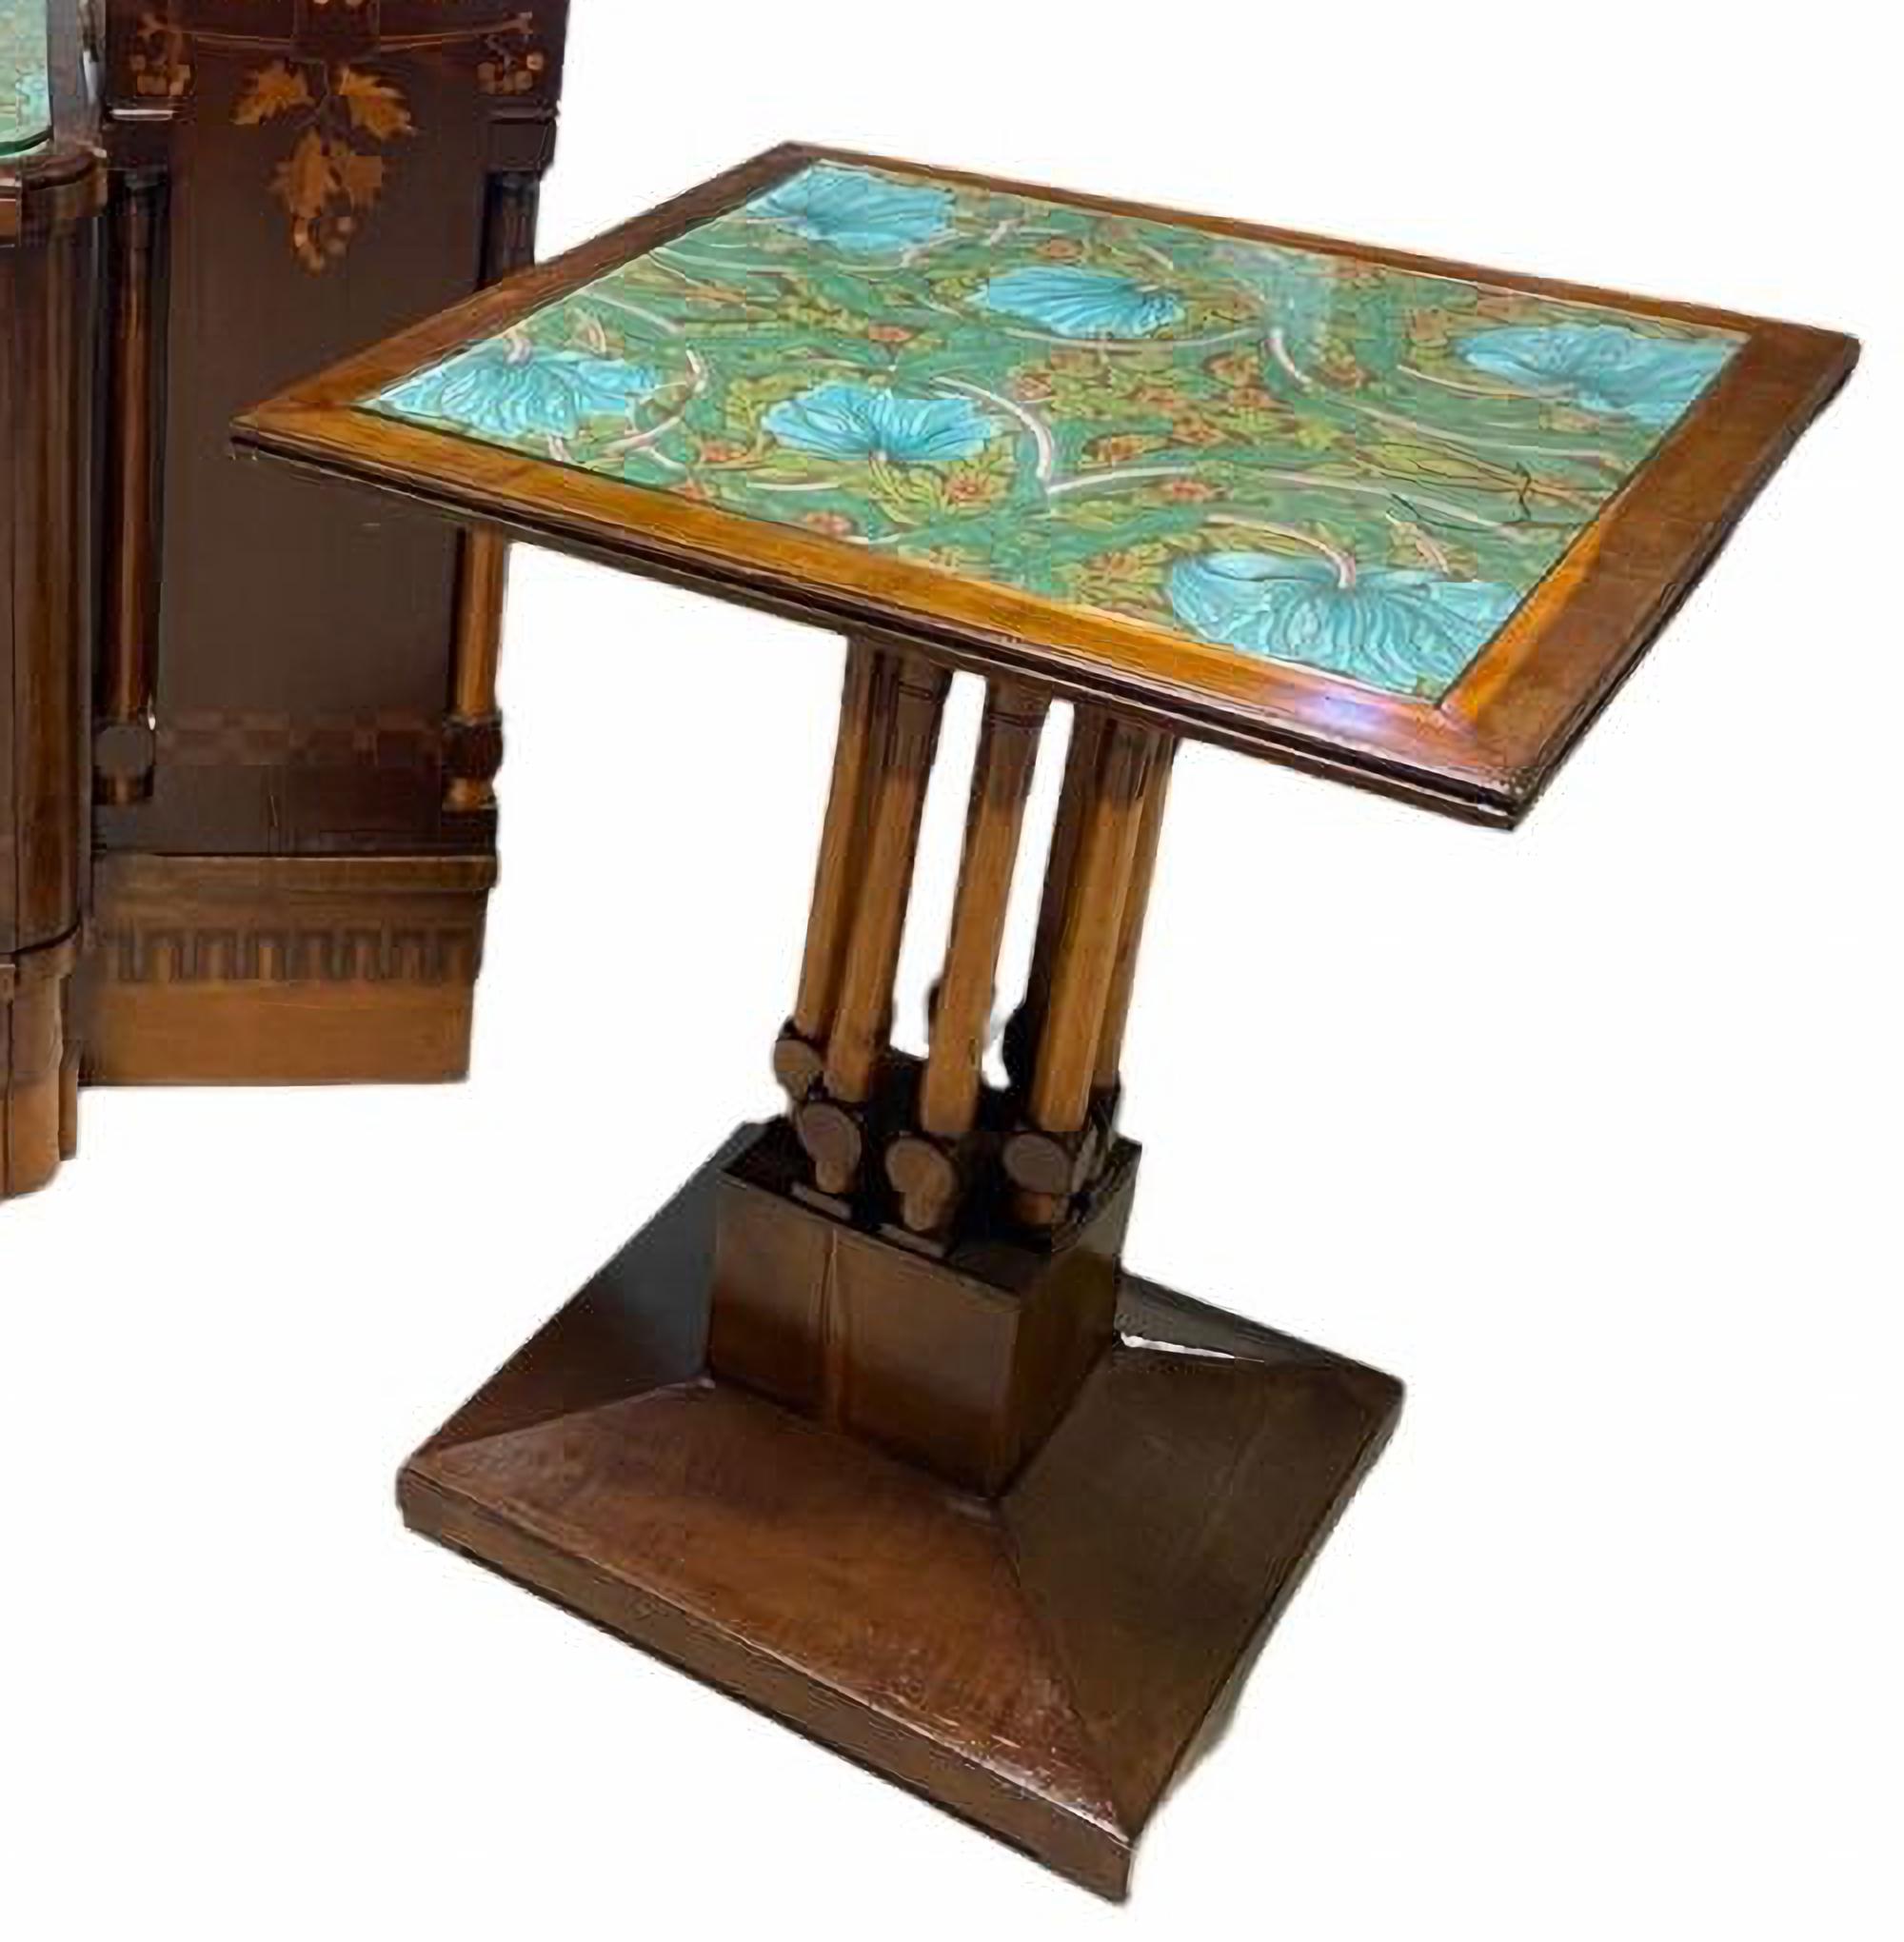 Italian Eugenio Quarti 1867-1929 Desk With Twin Table Decorated with Floral Inlays